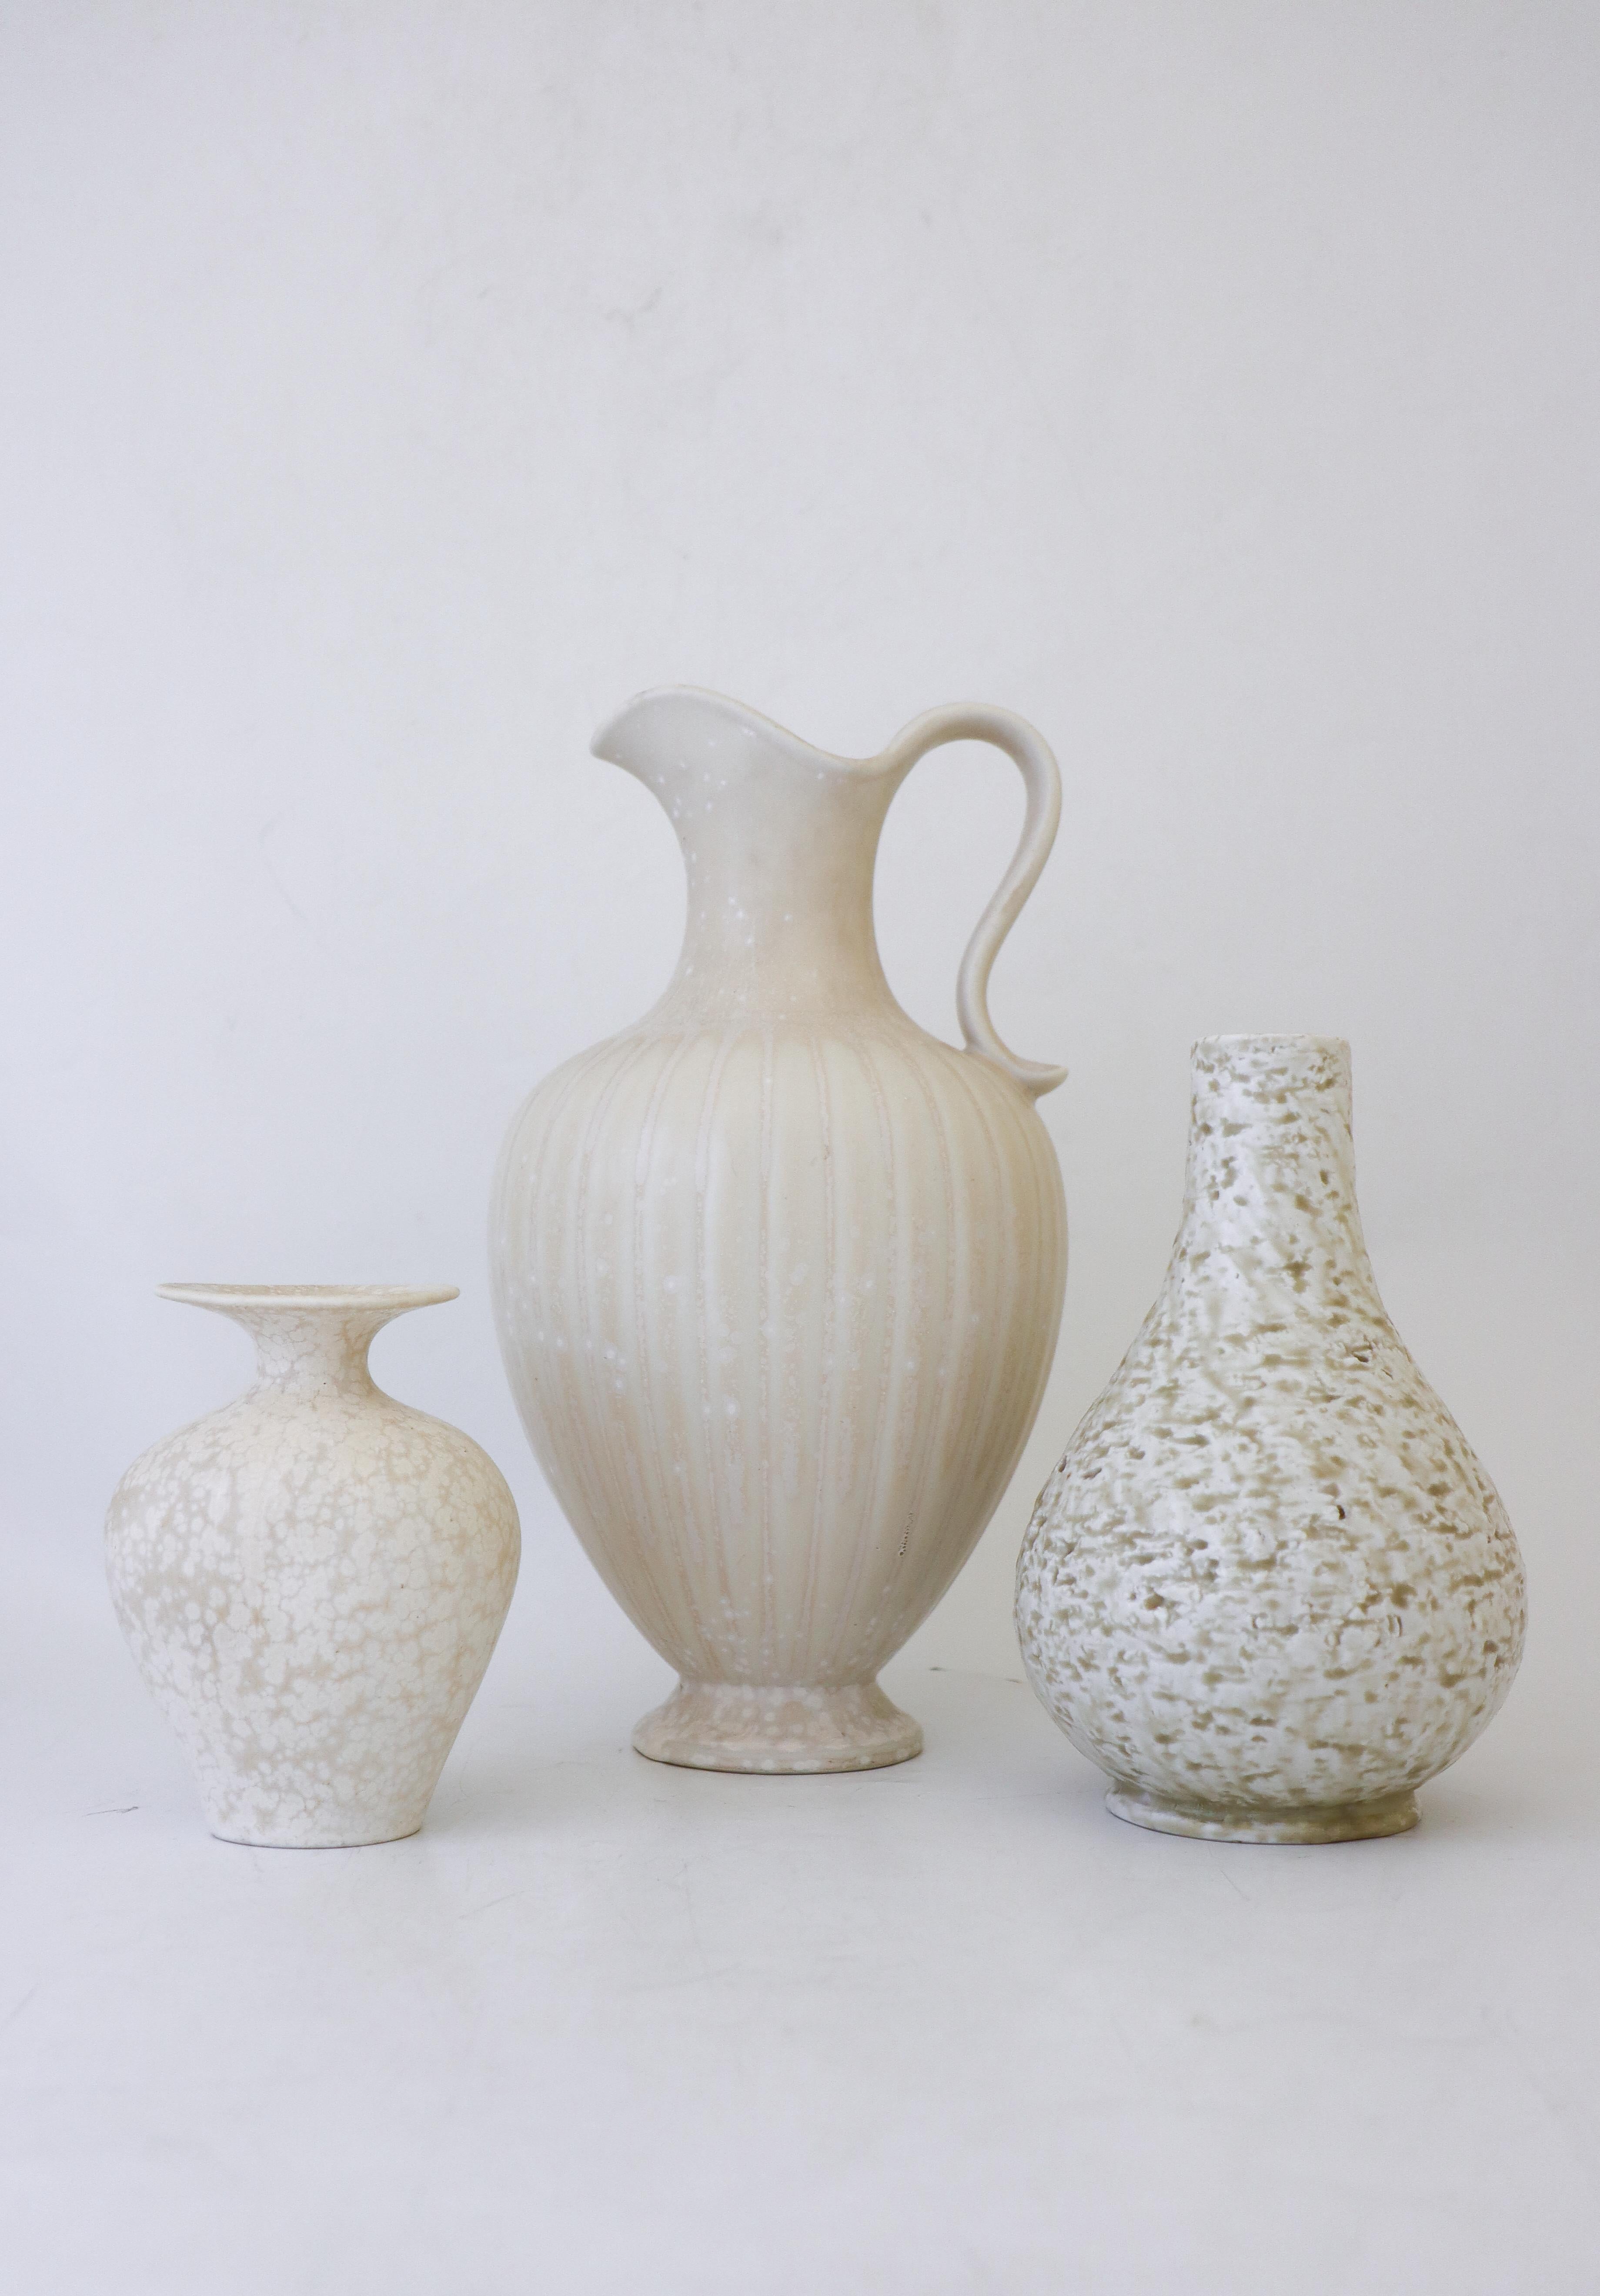 A group of three white vases designed by Gunnar Nylund at Rörstrand. The vases are 28, 19 and 12.5 cm high. They are all in excellent condition and marked as 1st quality. 

Gunnar Nylund was born in Paris 1904 with parents who worked as sculptors